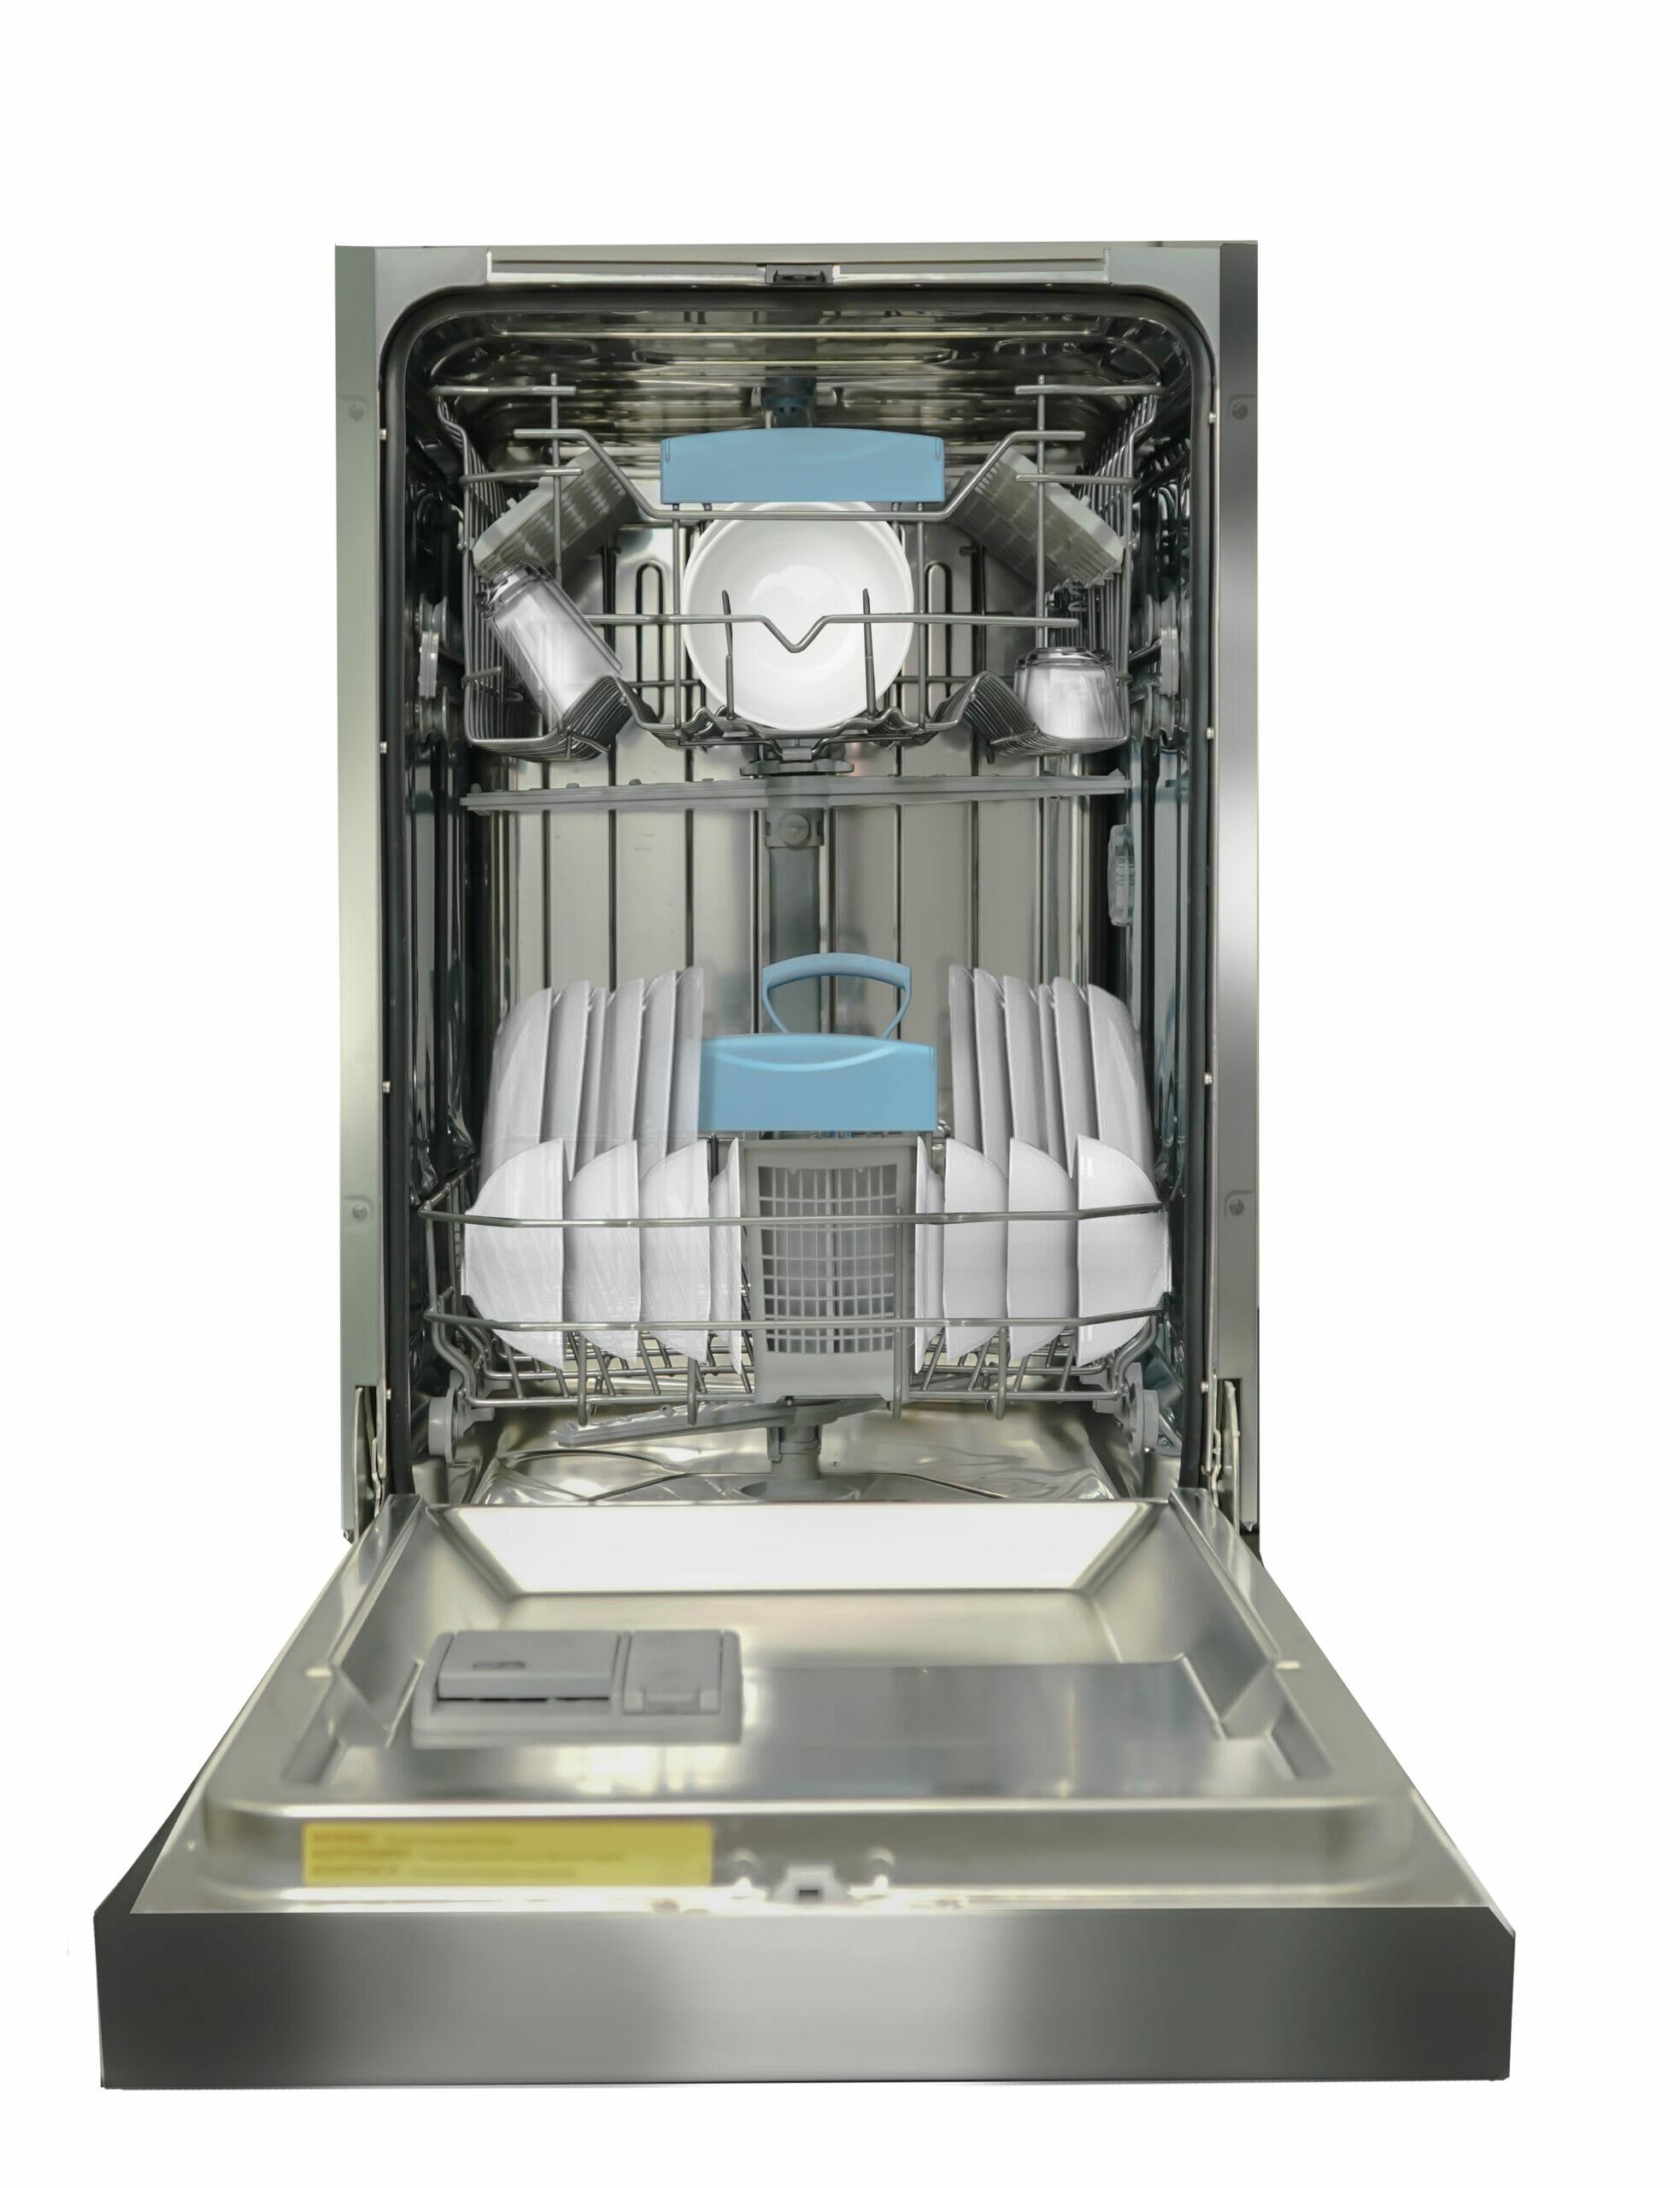 Danby 18" Wide Built-in Dishwasher in Stainless Steel